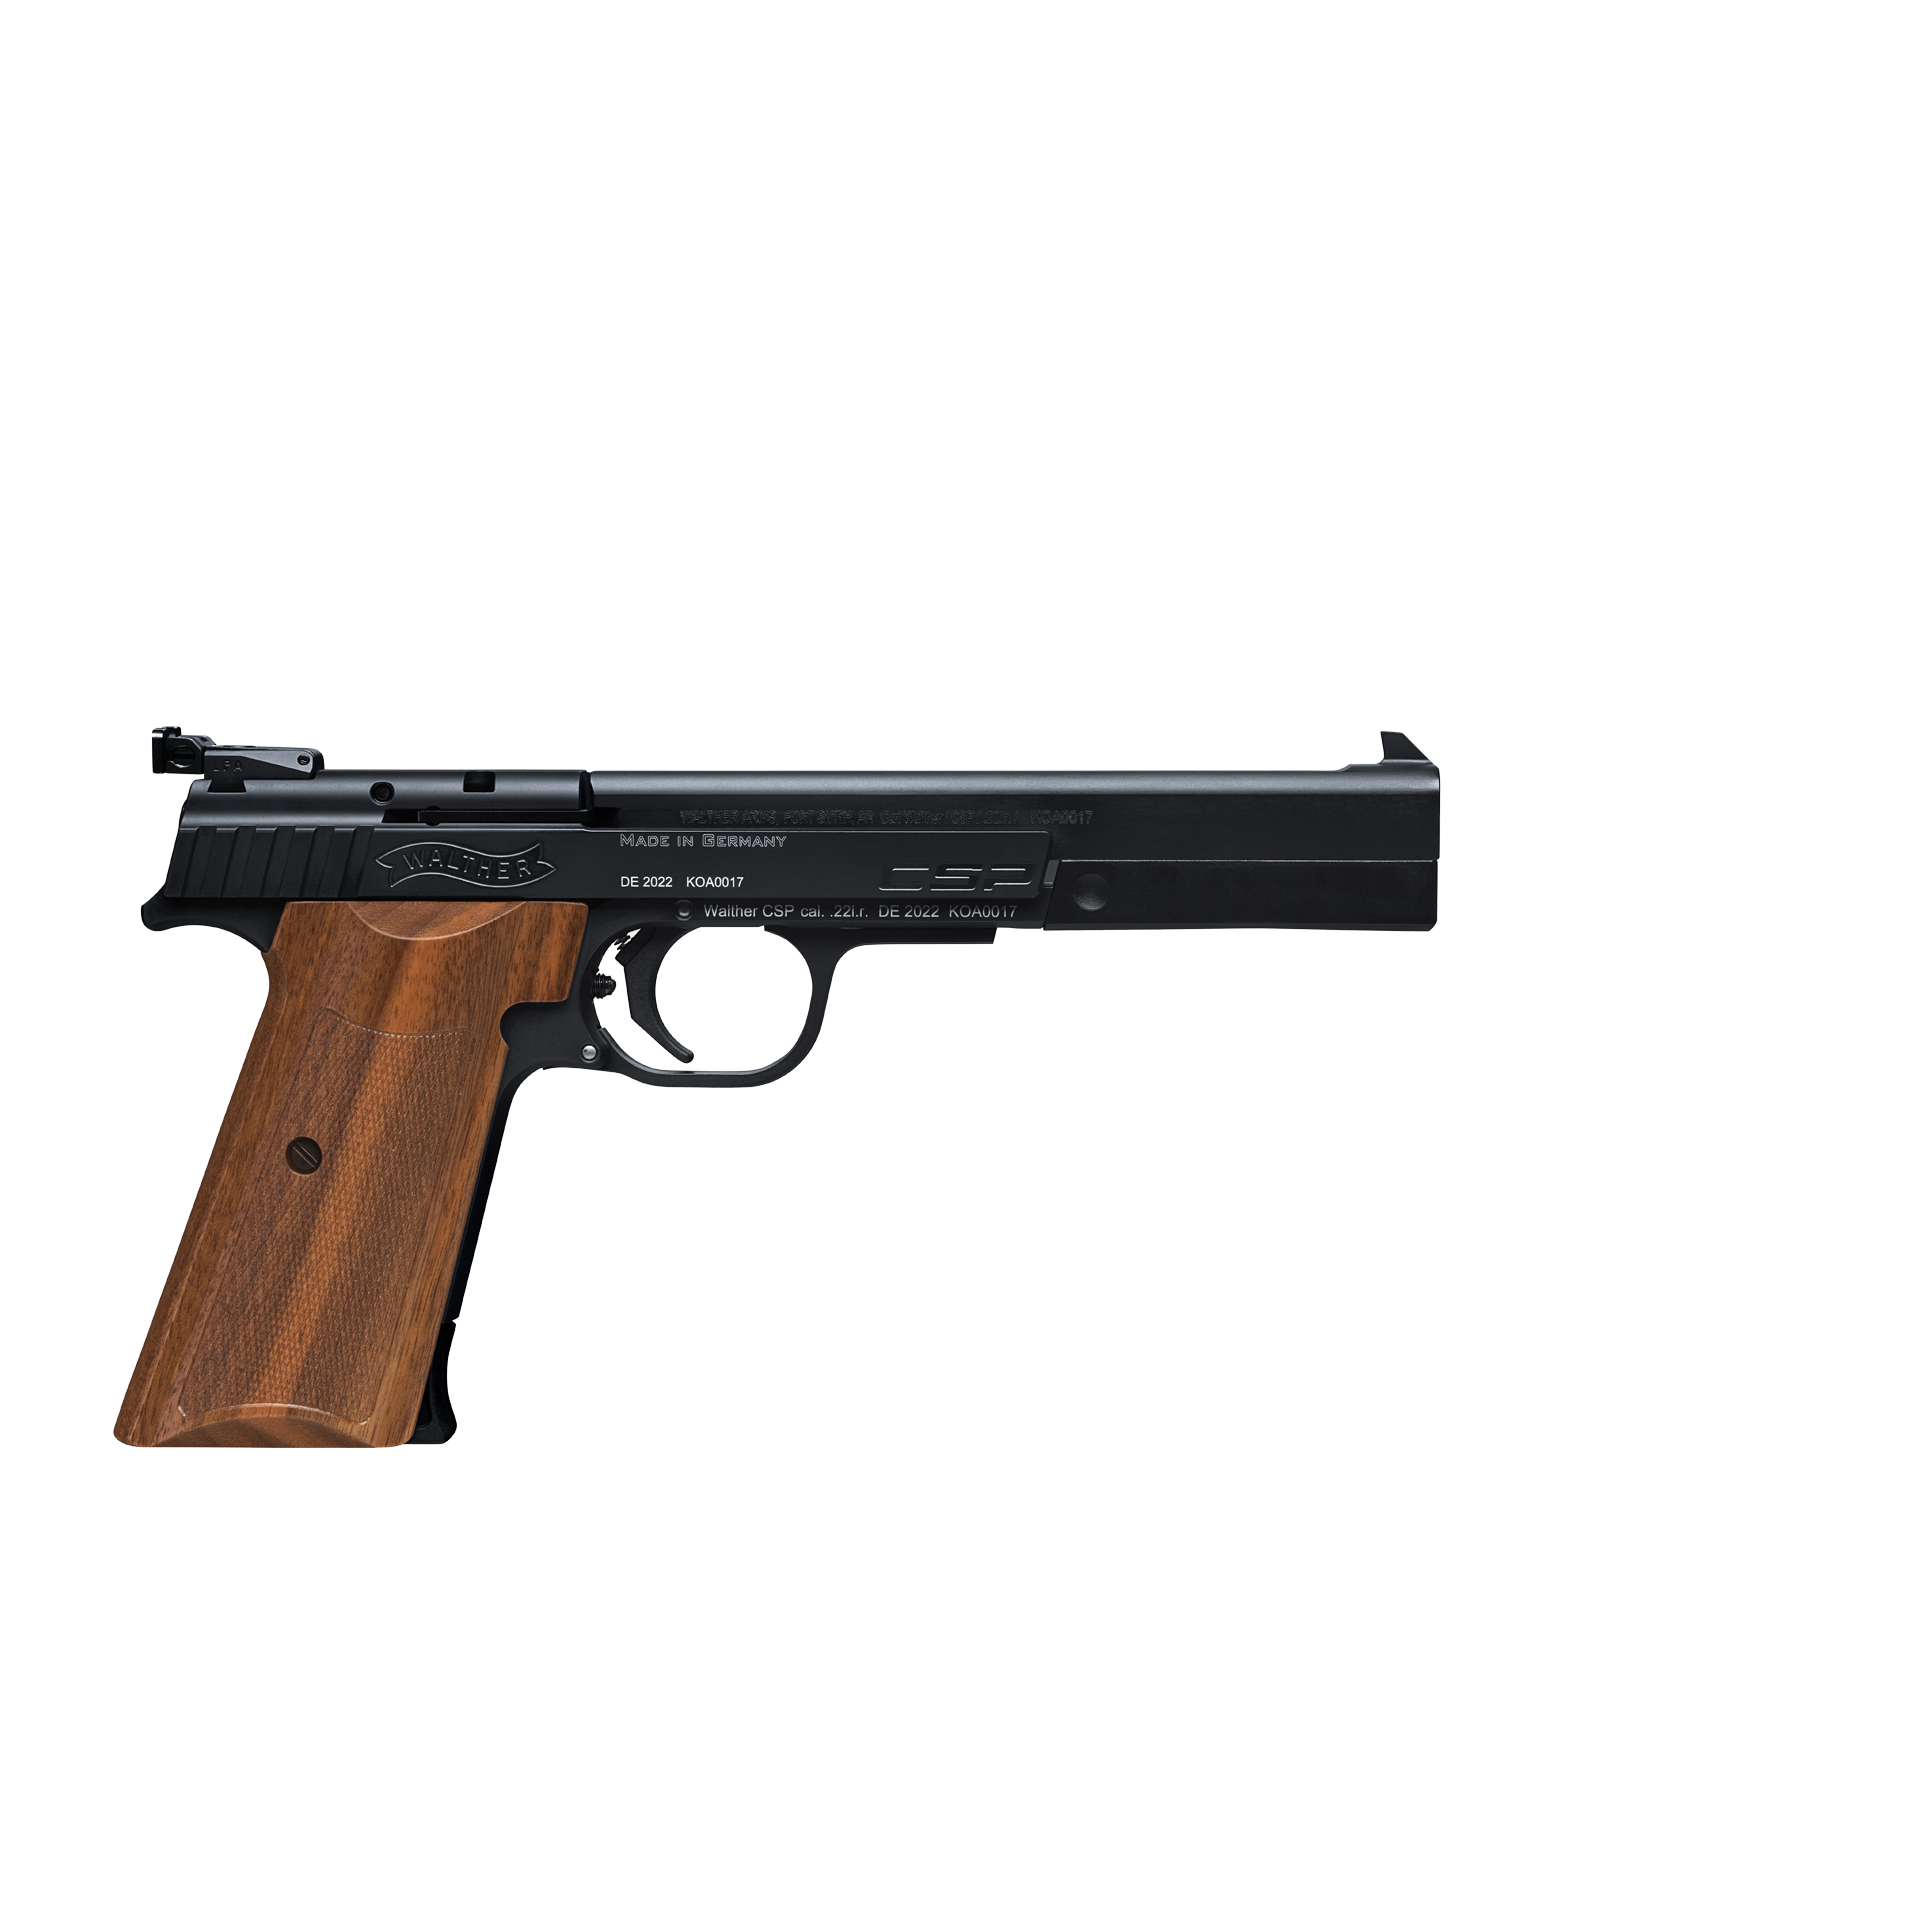 Walther CSP Classic .22 pistol